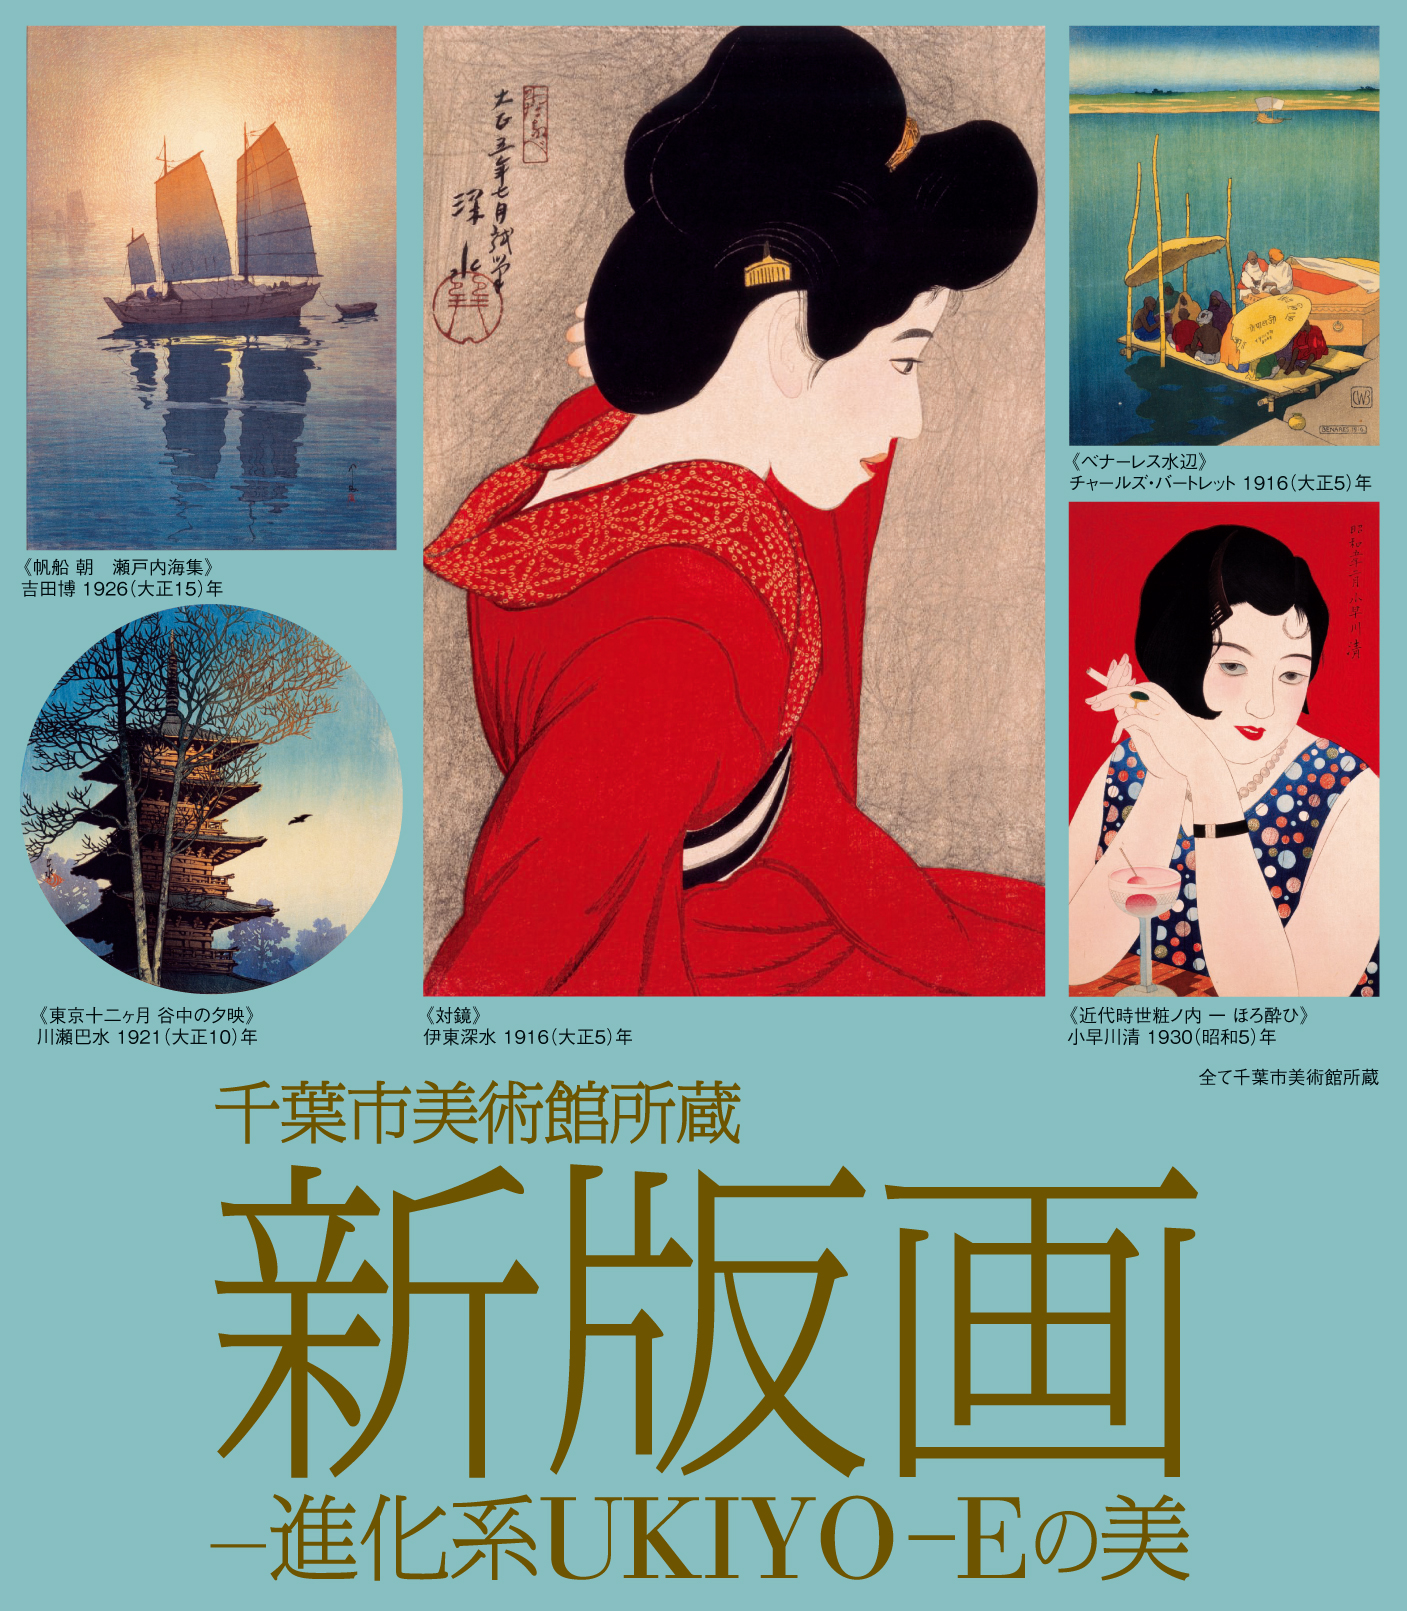 Chiba City Museum of Art Collection: New Prints – The Evolution of